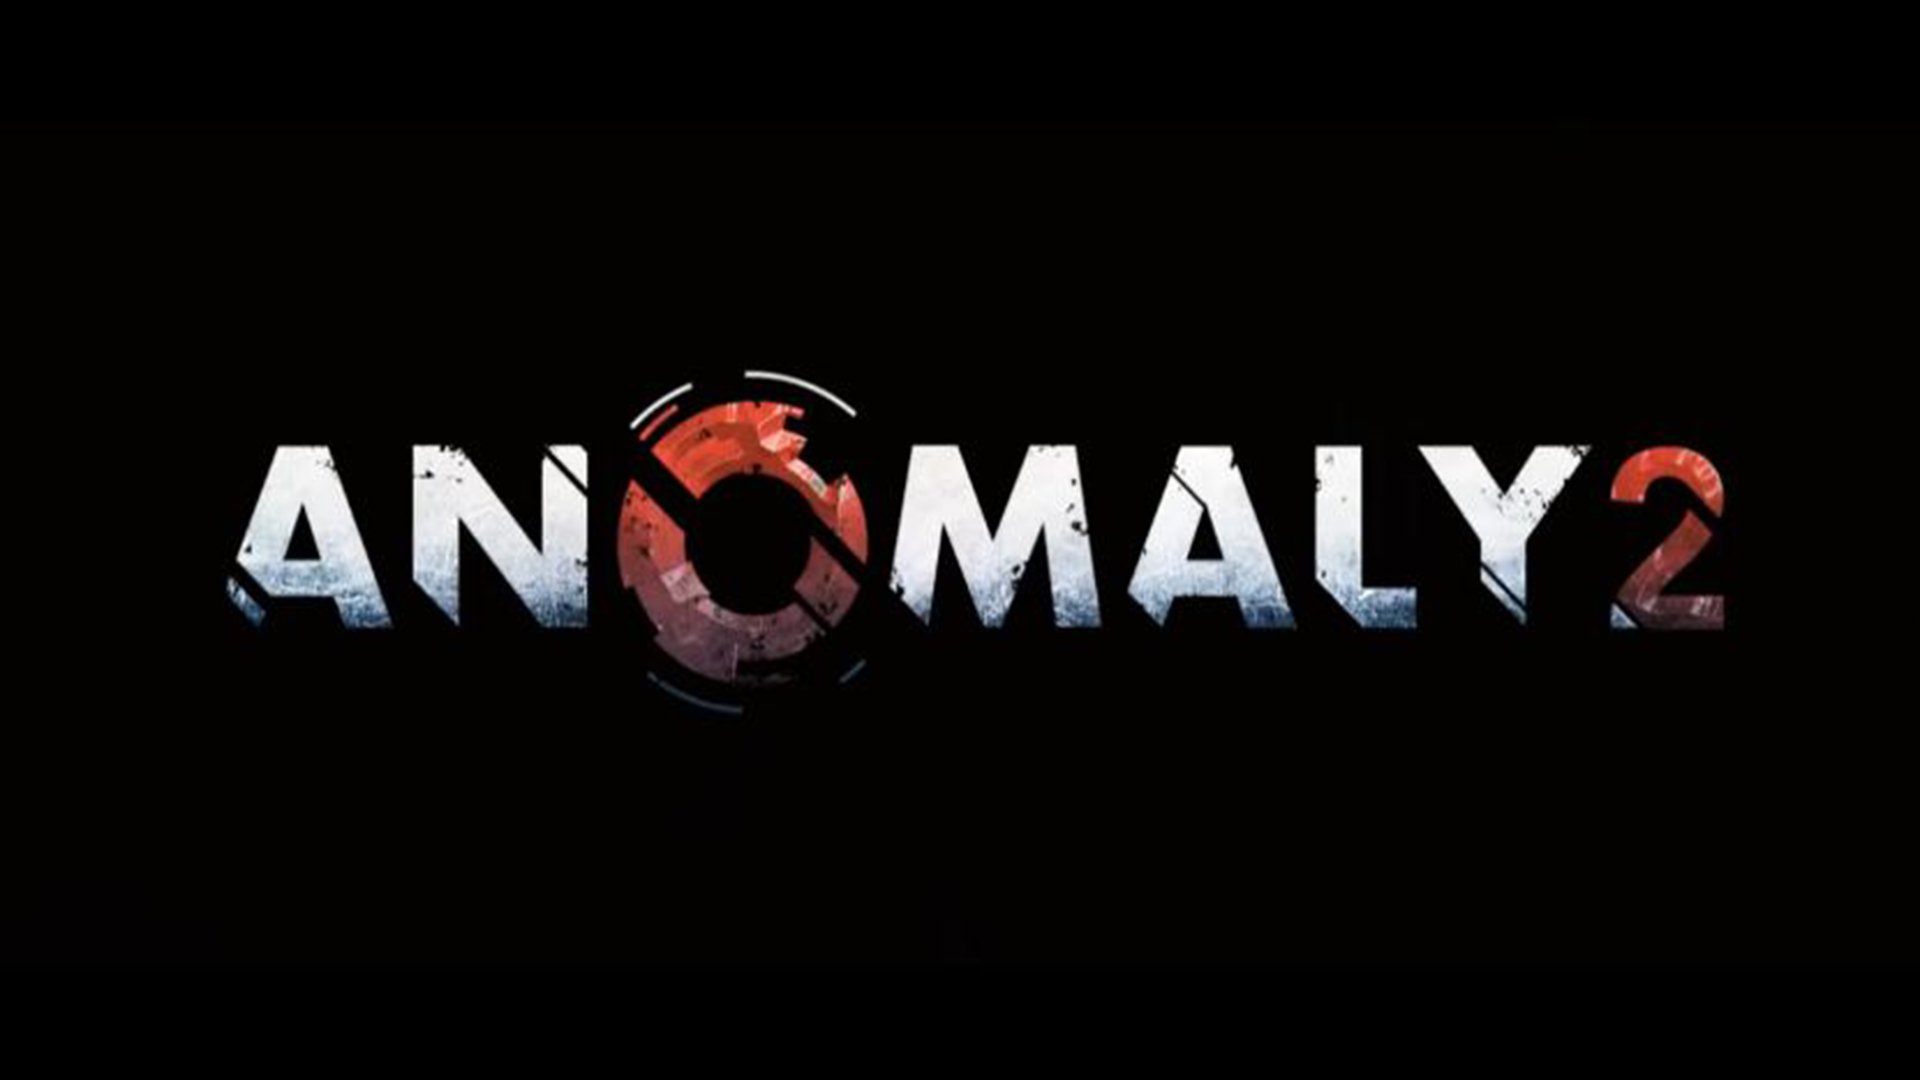 Anomaly 2 Hd Wallpaper Background Image 1920x1080 Id 530950 Images, Photos, Reviews